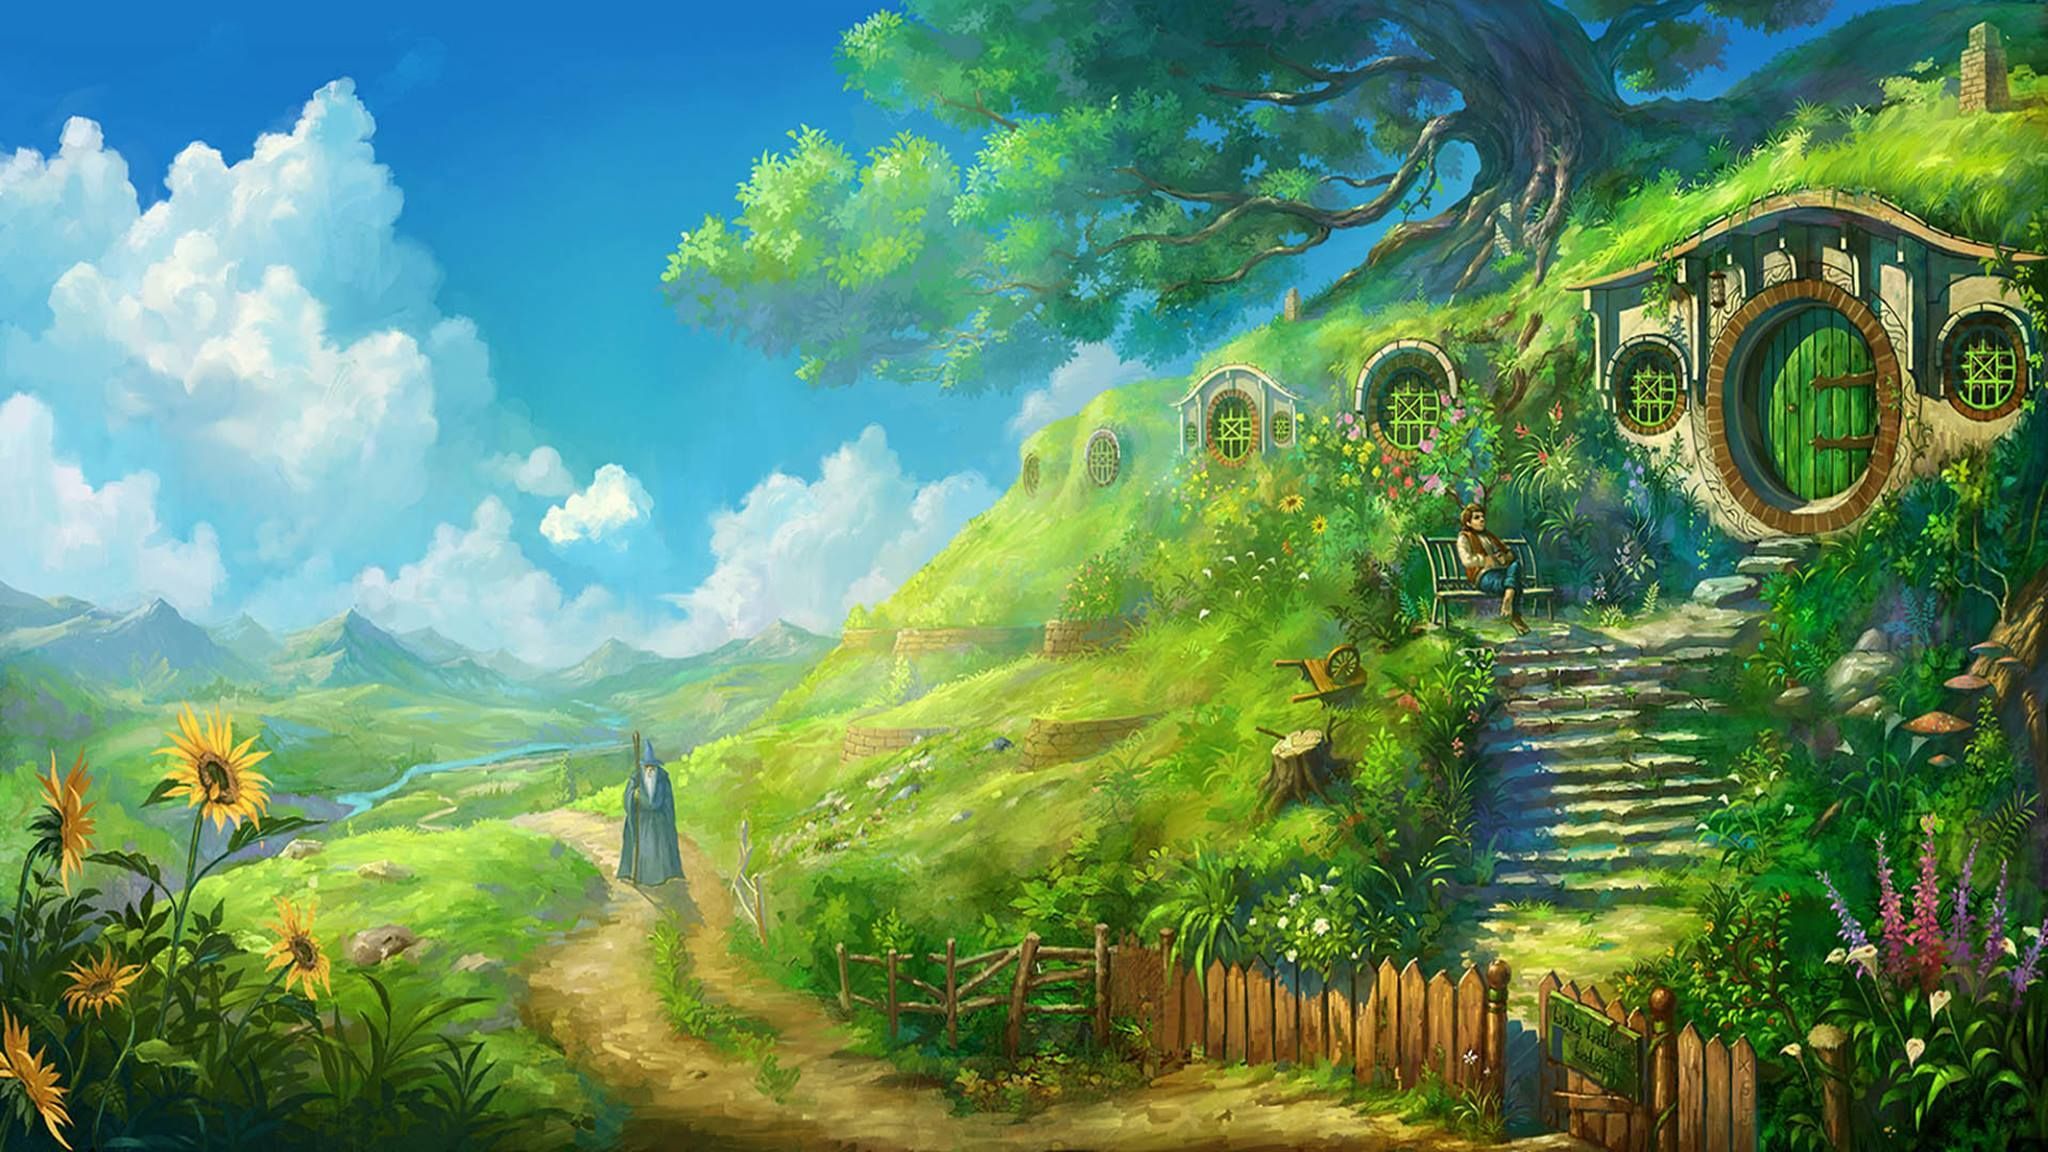 Studio Ghibli Esque Lord Of The Rings. Anime Scenery